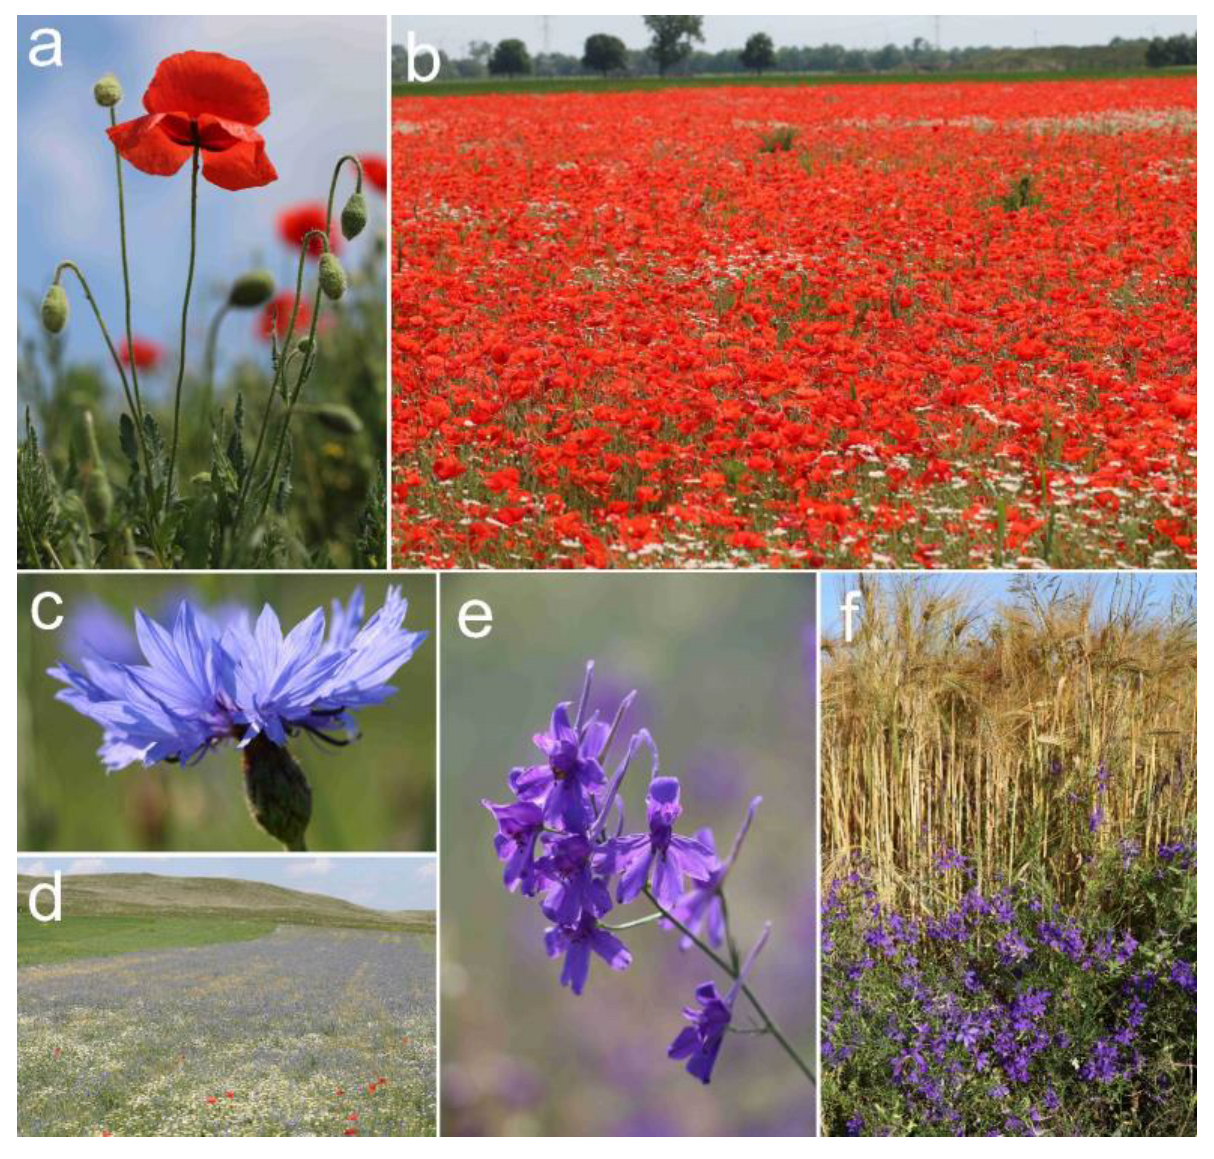 Plants | Free Full-Text | Iconic Arable Weeds: The Significance of Corn  Poppy (Papaver rhoeas), Cornflower (Centaurea cyanus), and Field Larkspur  (Delphinium consolida) in Hungarian Ethnobotanical and Cultural Heritage